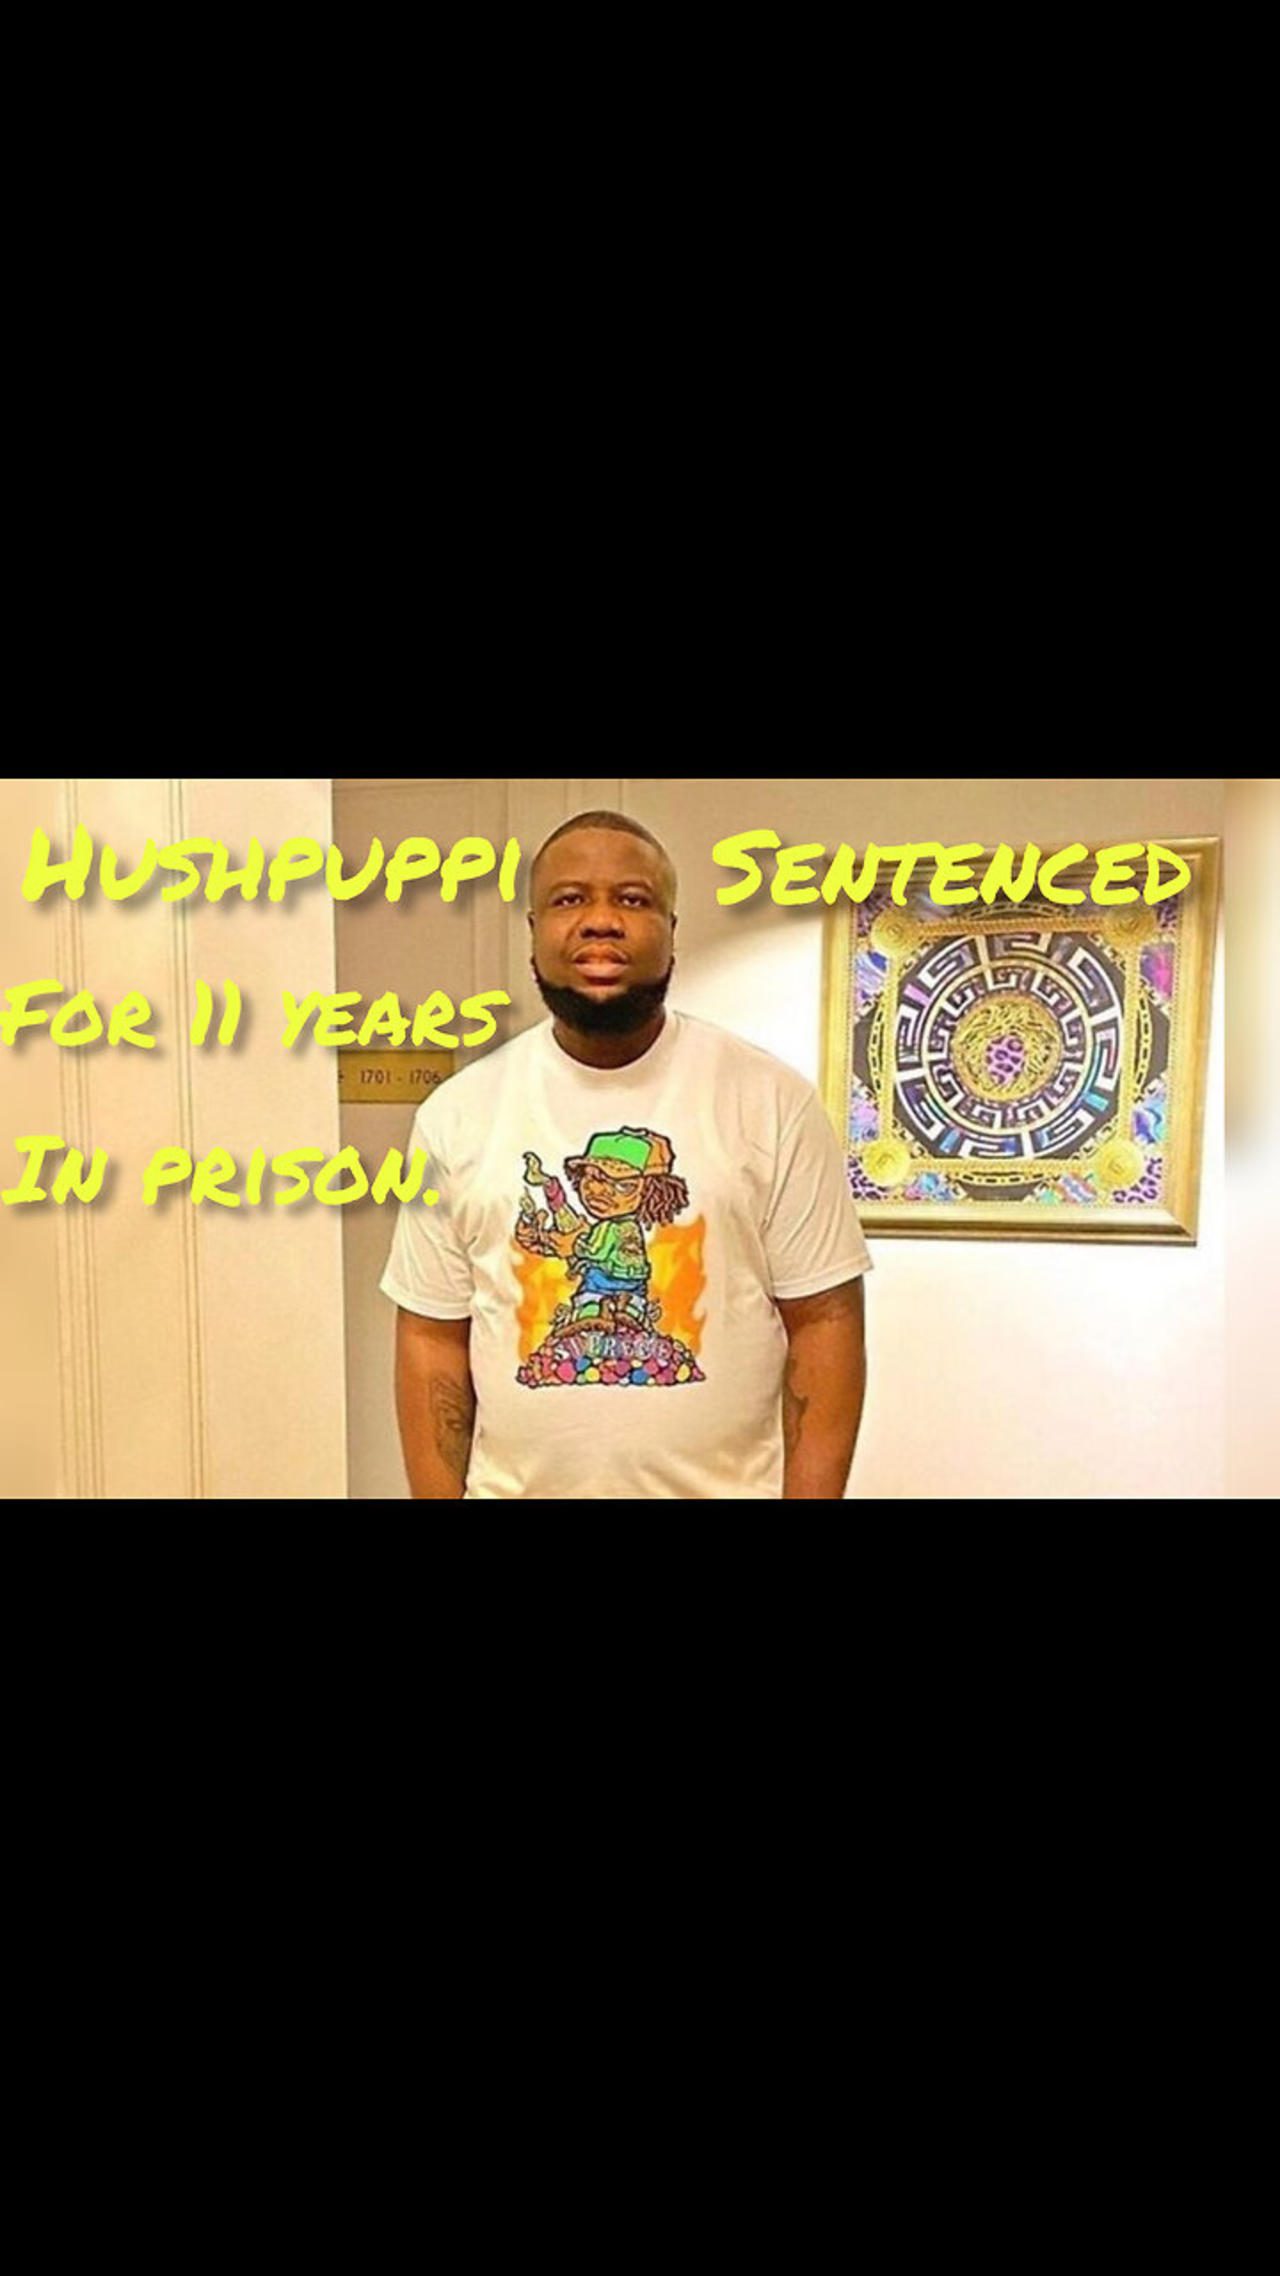 Hushpuppi Sentenced to 11 years(135 months) in Prison.